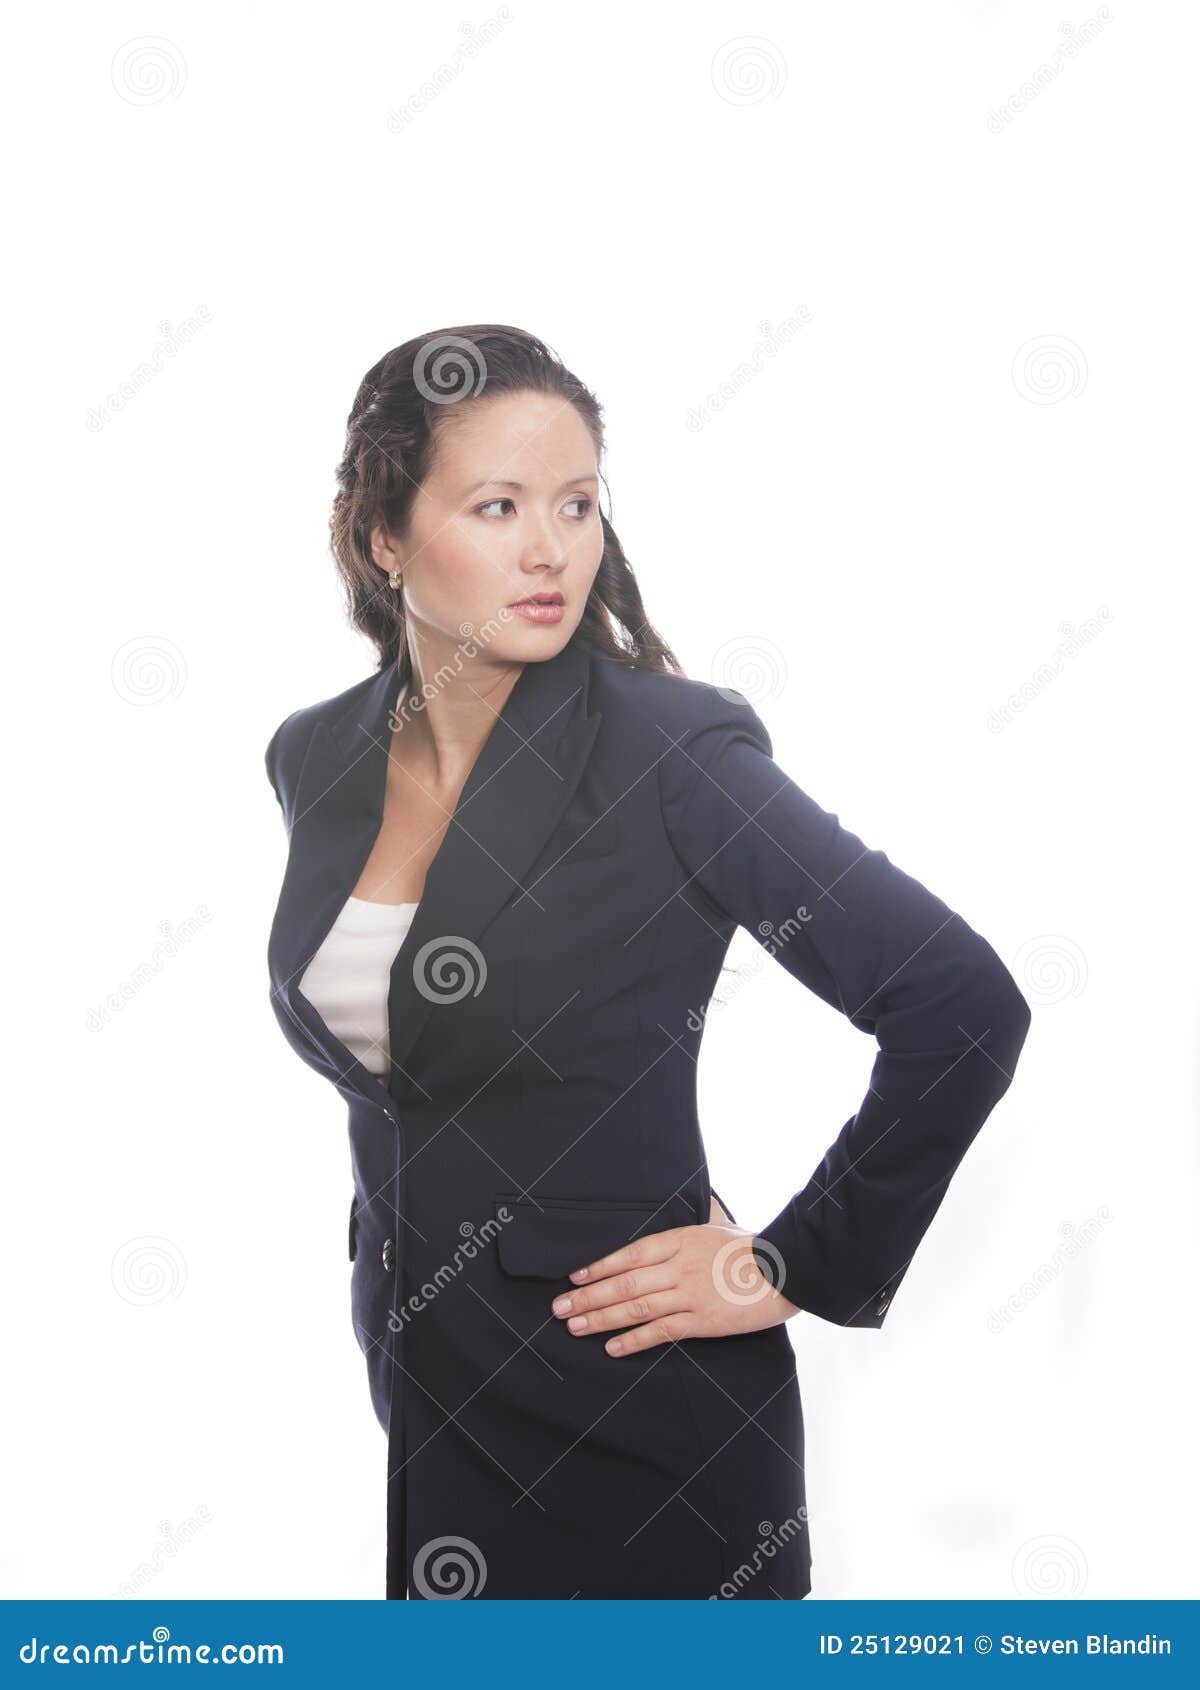 Hands On Hips Stock Image - Image: 25129021